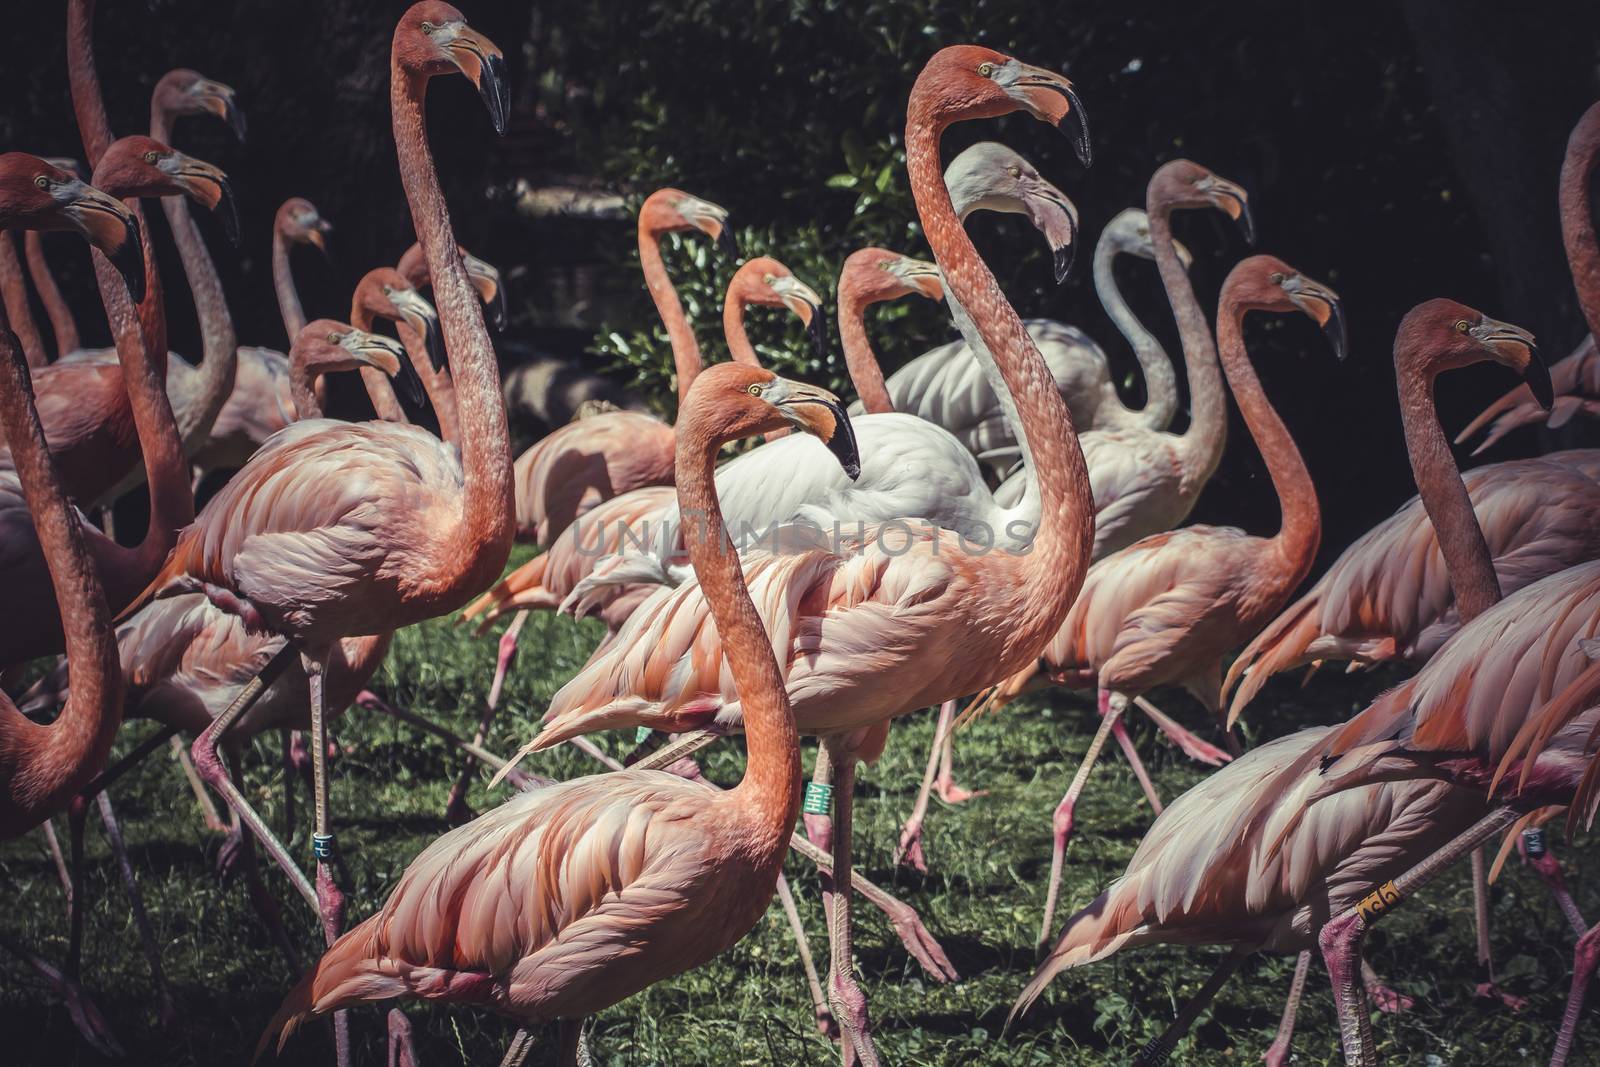 group of flamingoes with long necks and beautiful plumage by FernandoCortes